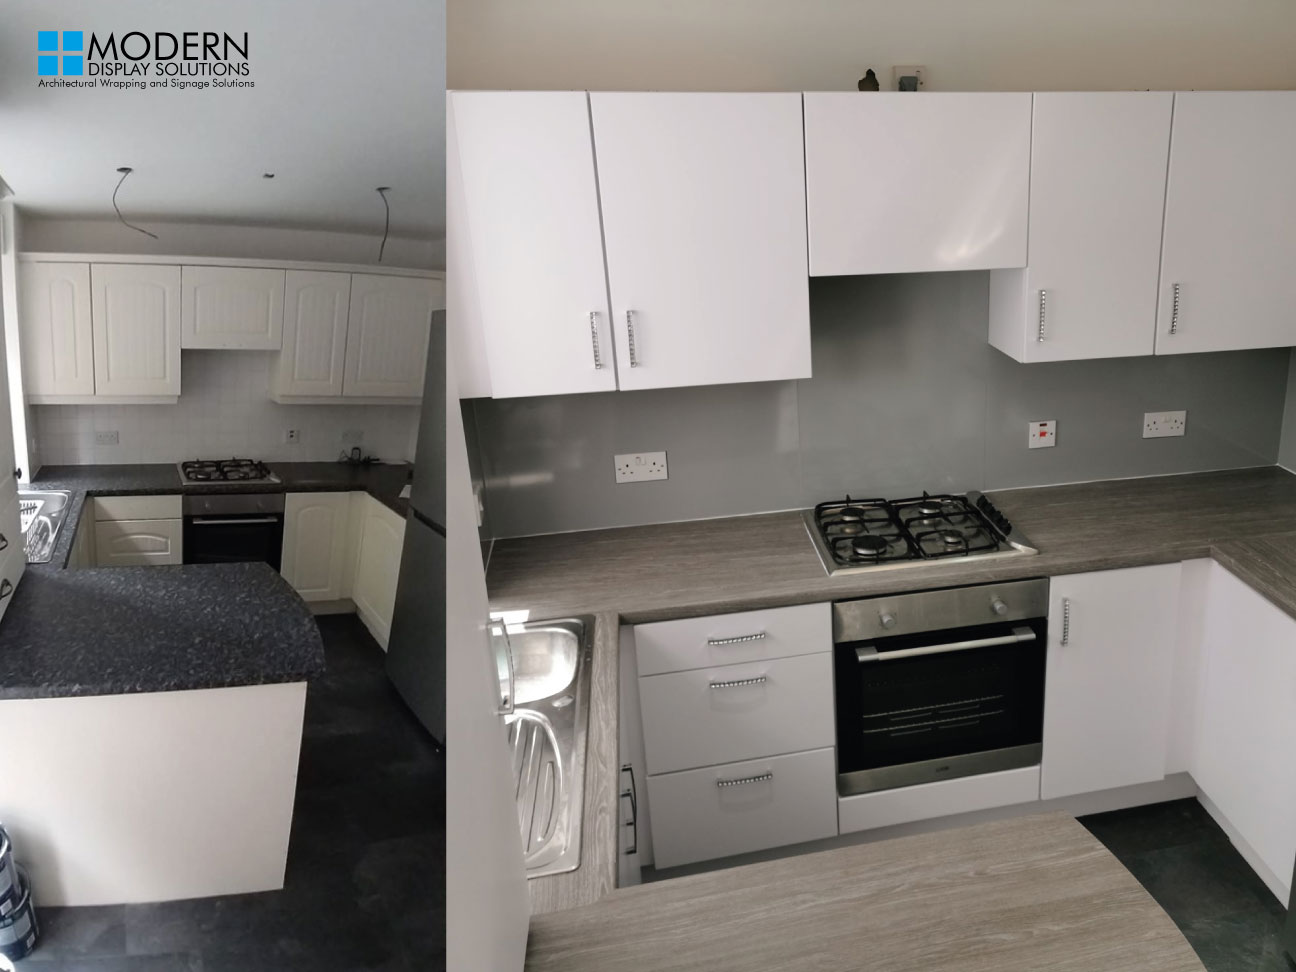 https://modernds.co.uk/grersase/2019/07/1-before-and-after-kitchen-wrap.jpg